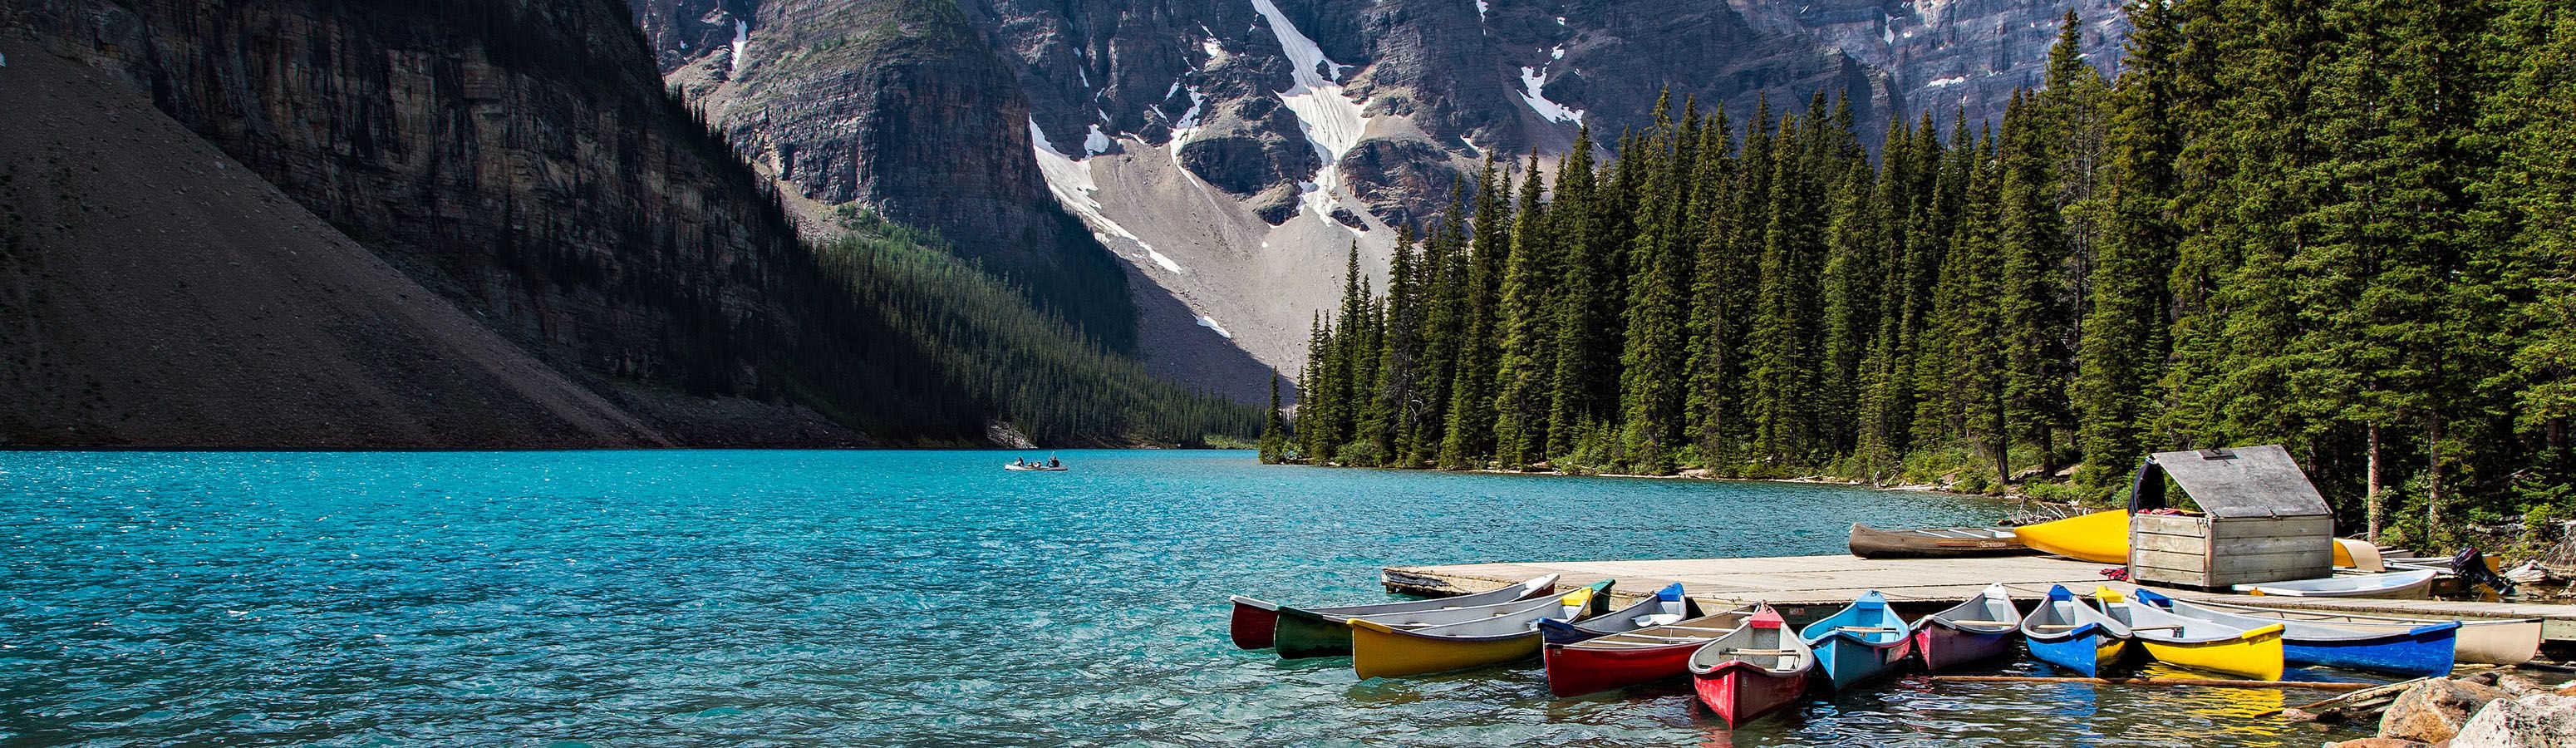 Something for hiking lovers again - clear your head in the wild Canadian wilderness!